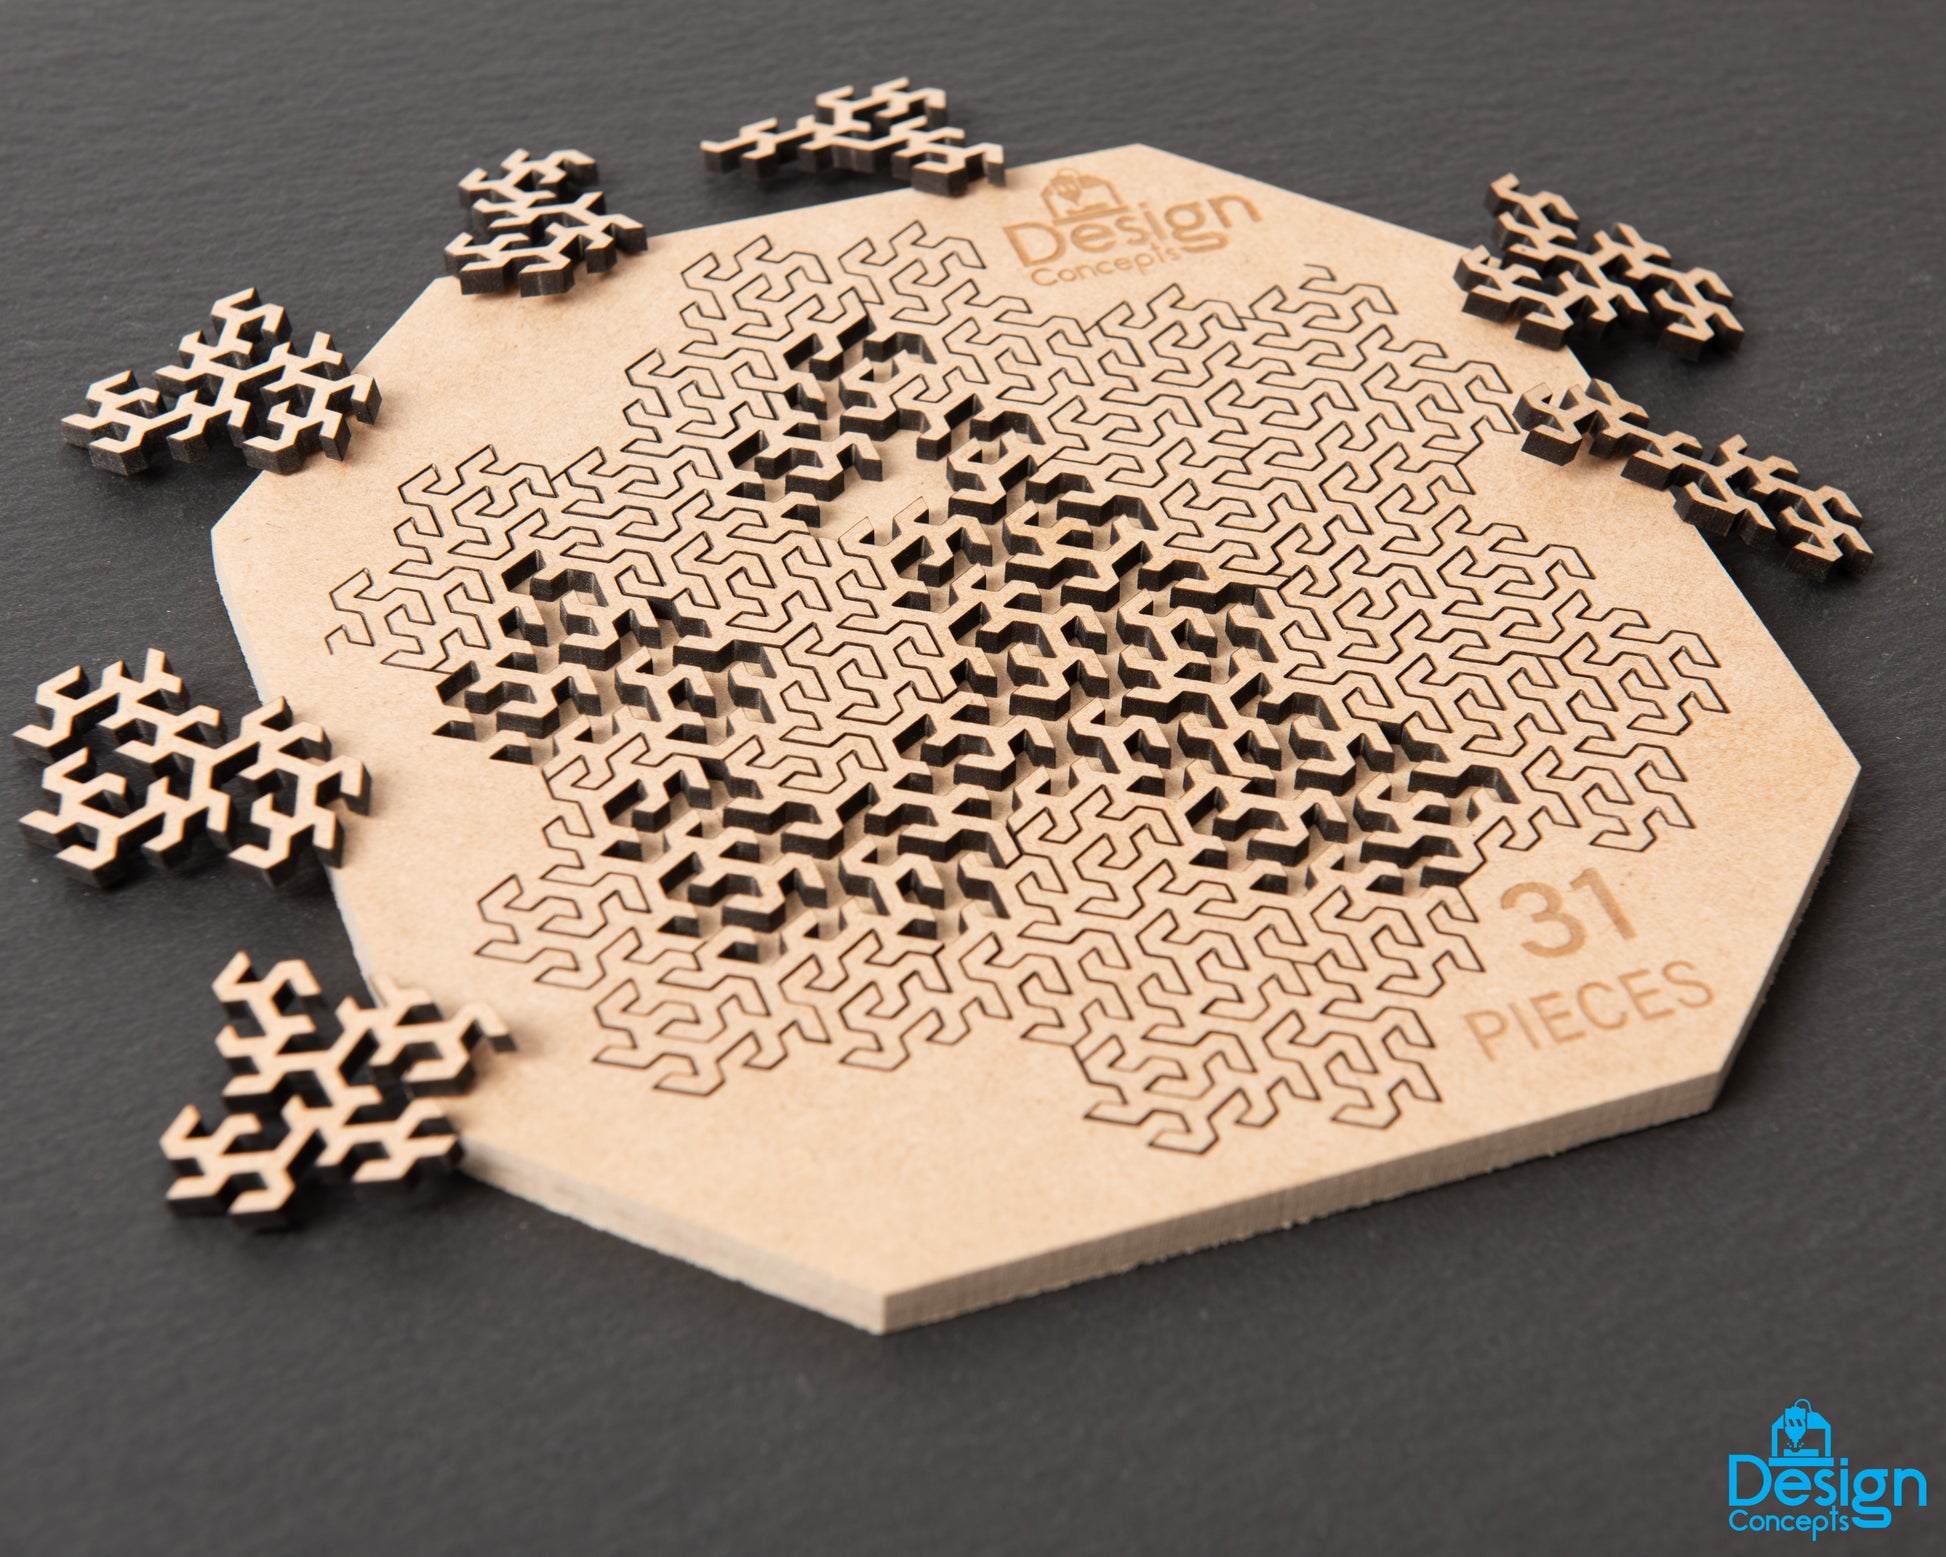 Fractal Jigsaw Puzzle (31-Piece Jagged Version) - Design Concepts Chi